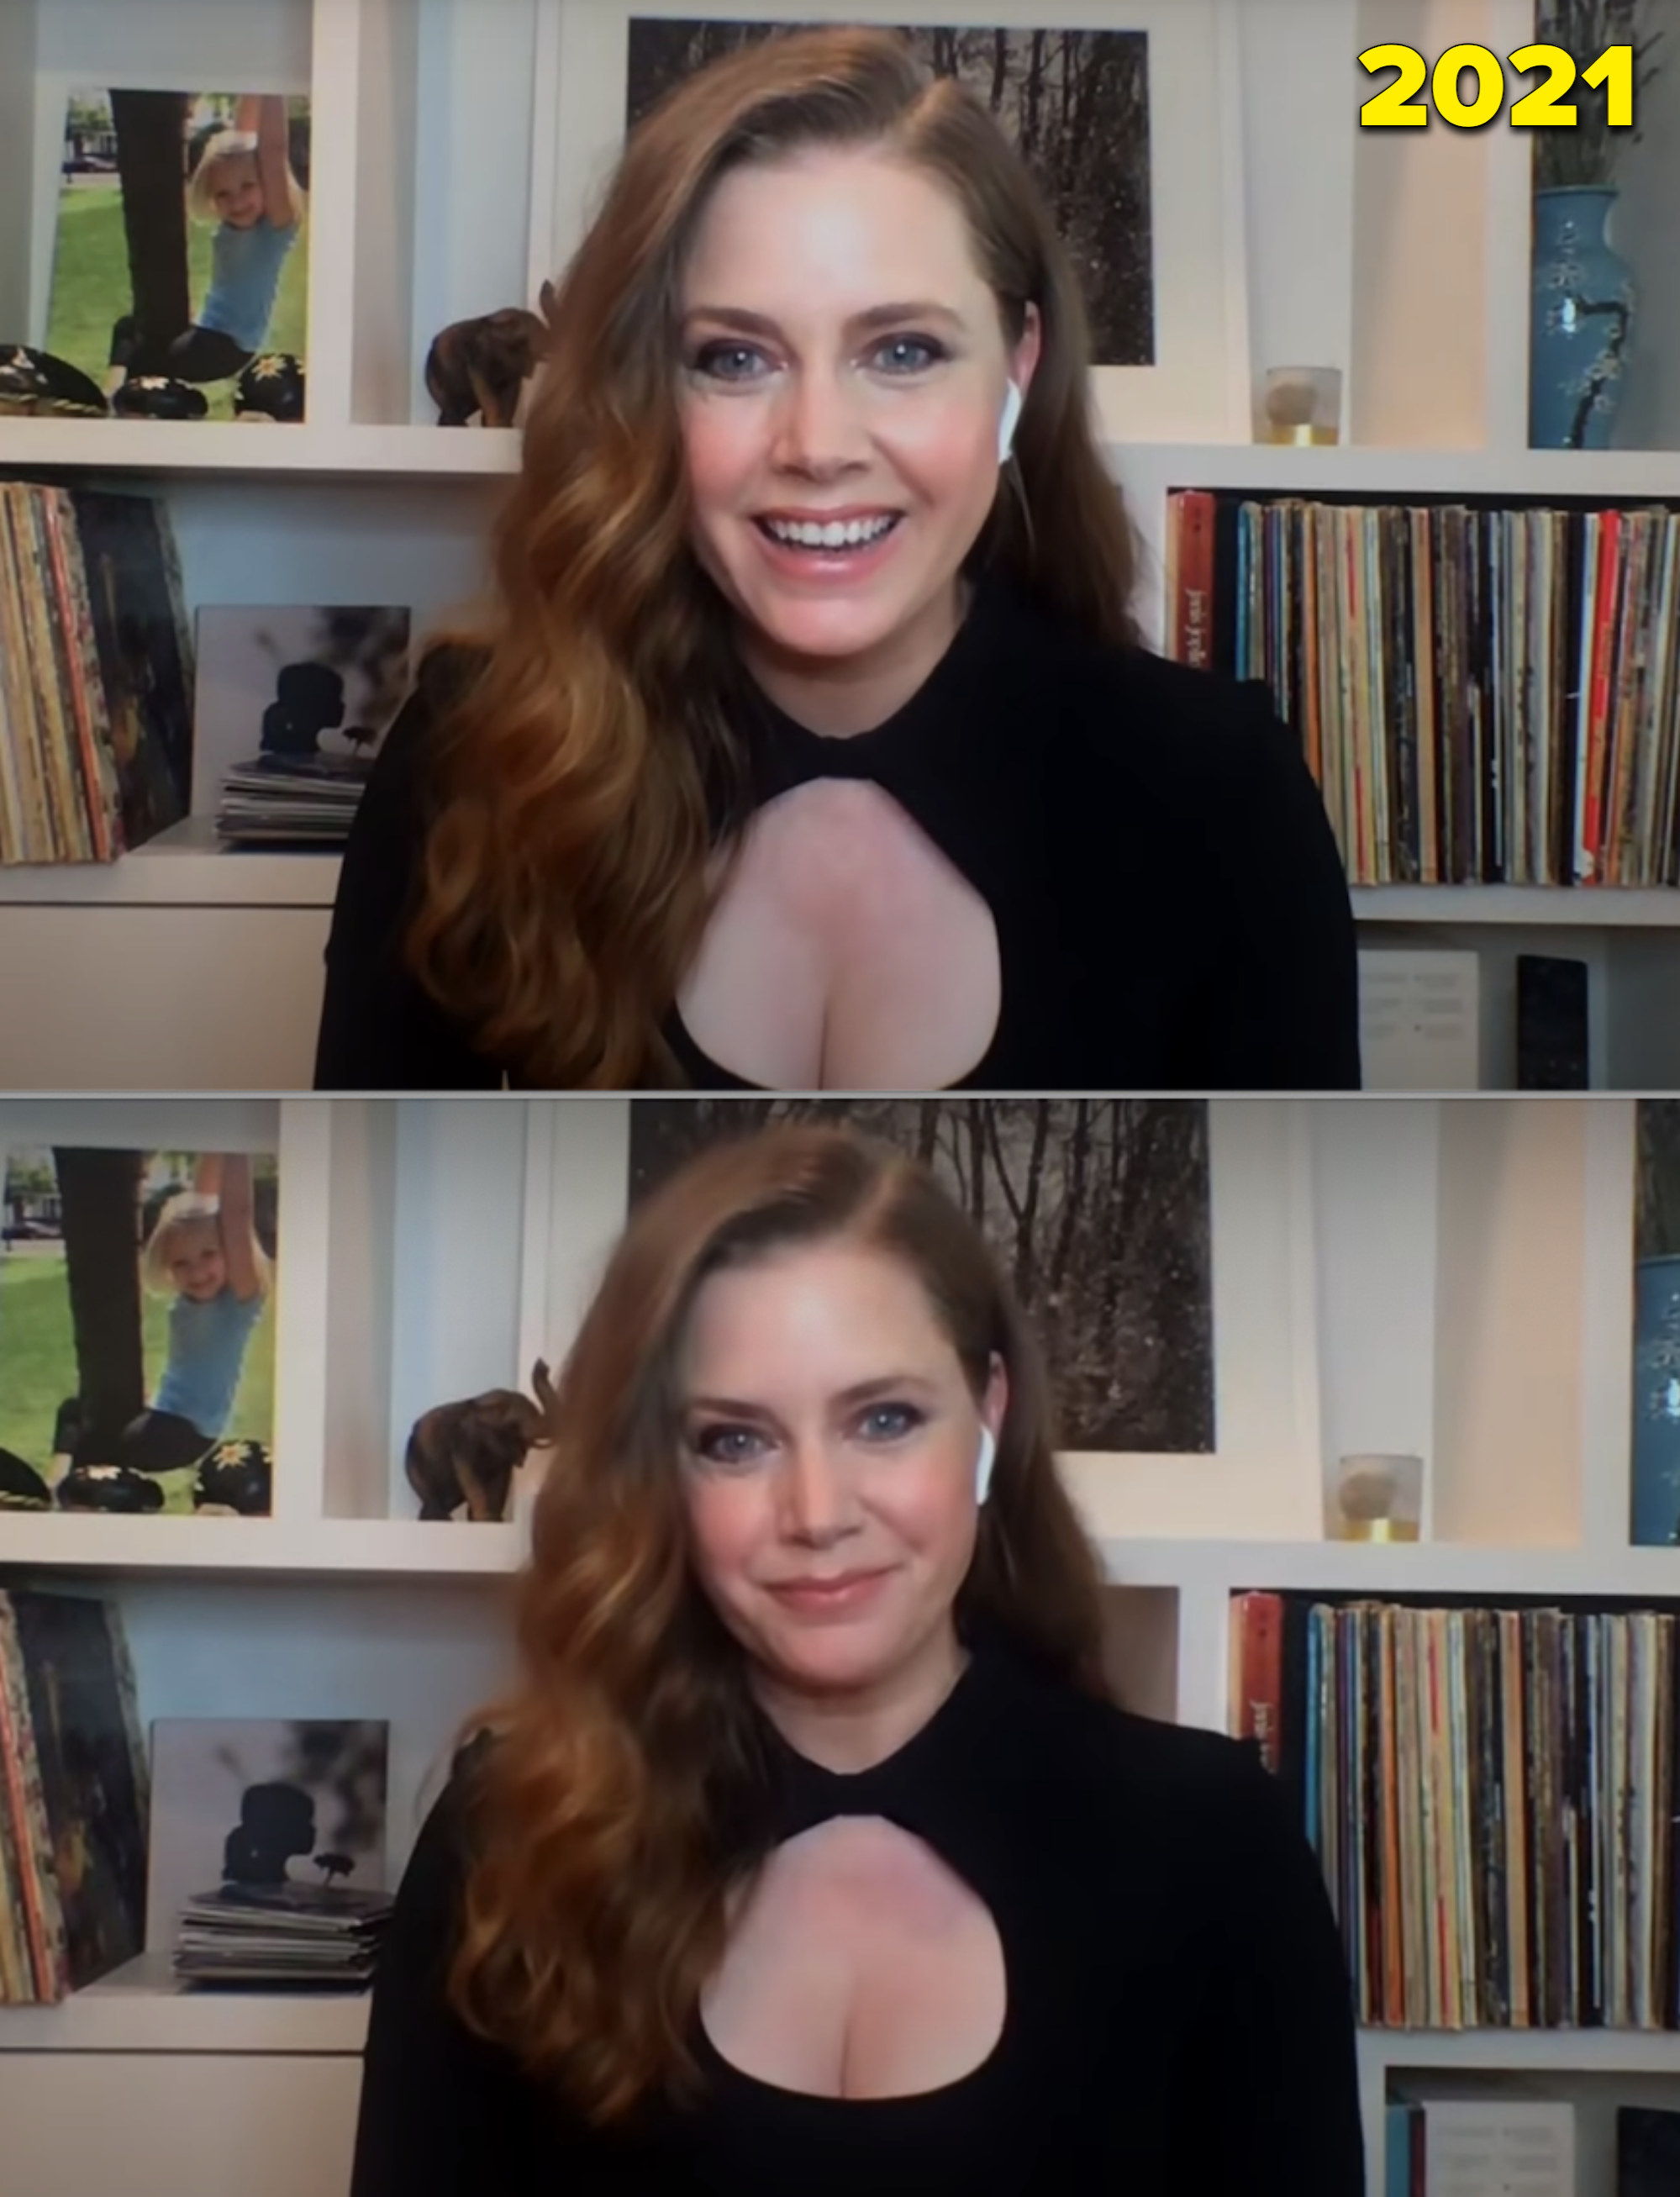 Amy Adams being interviewed over Zoom in her apartment